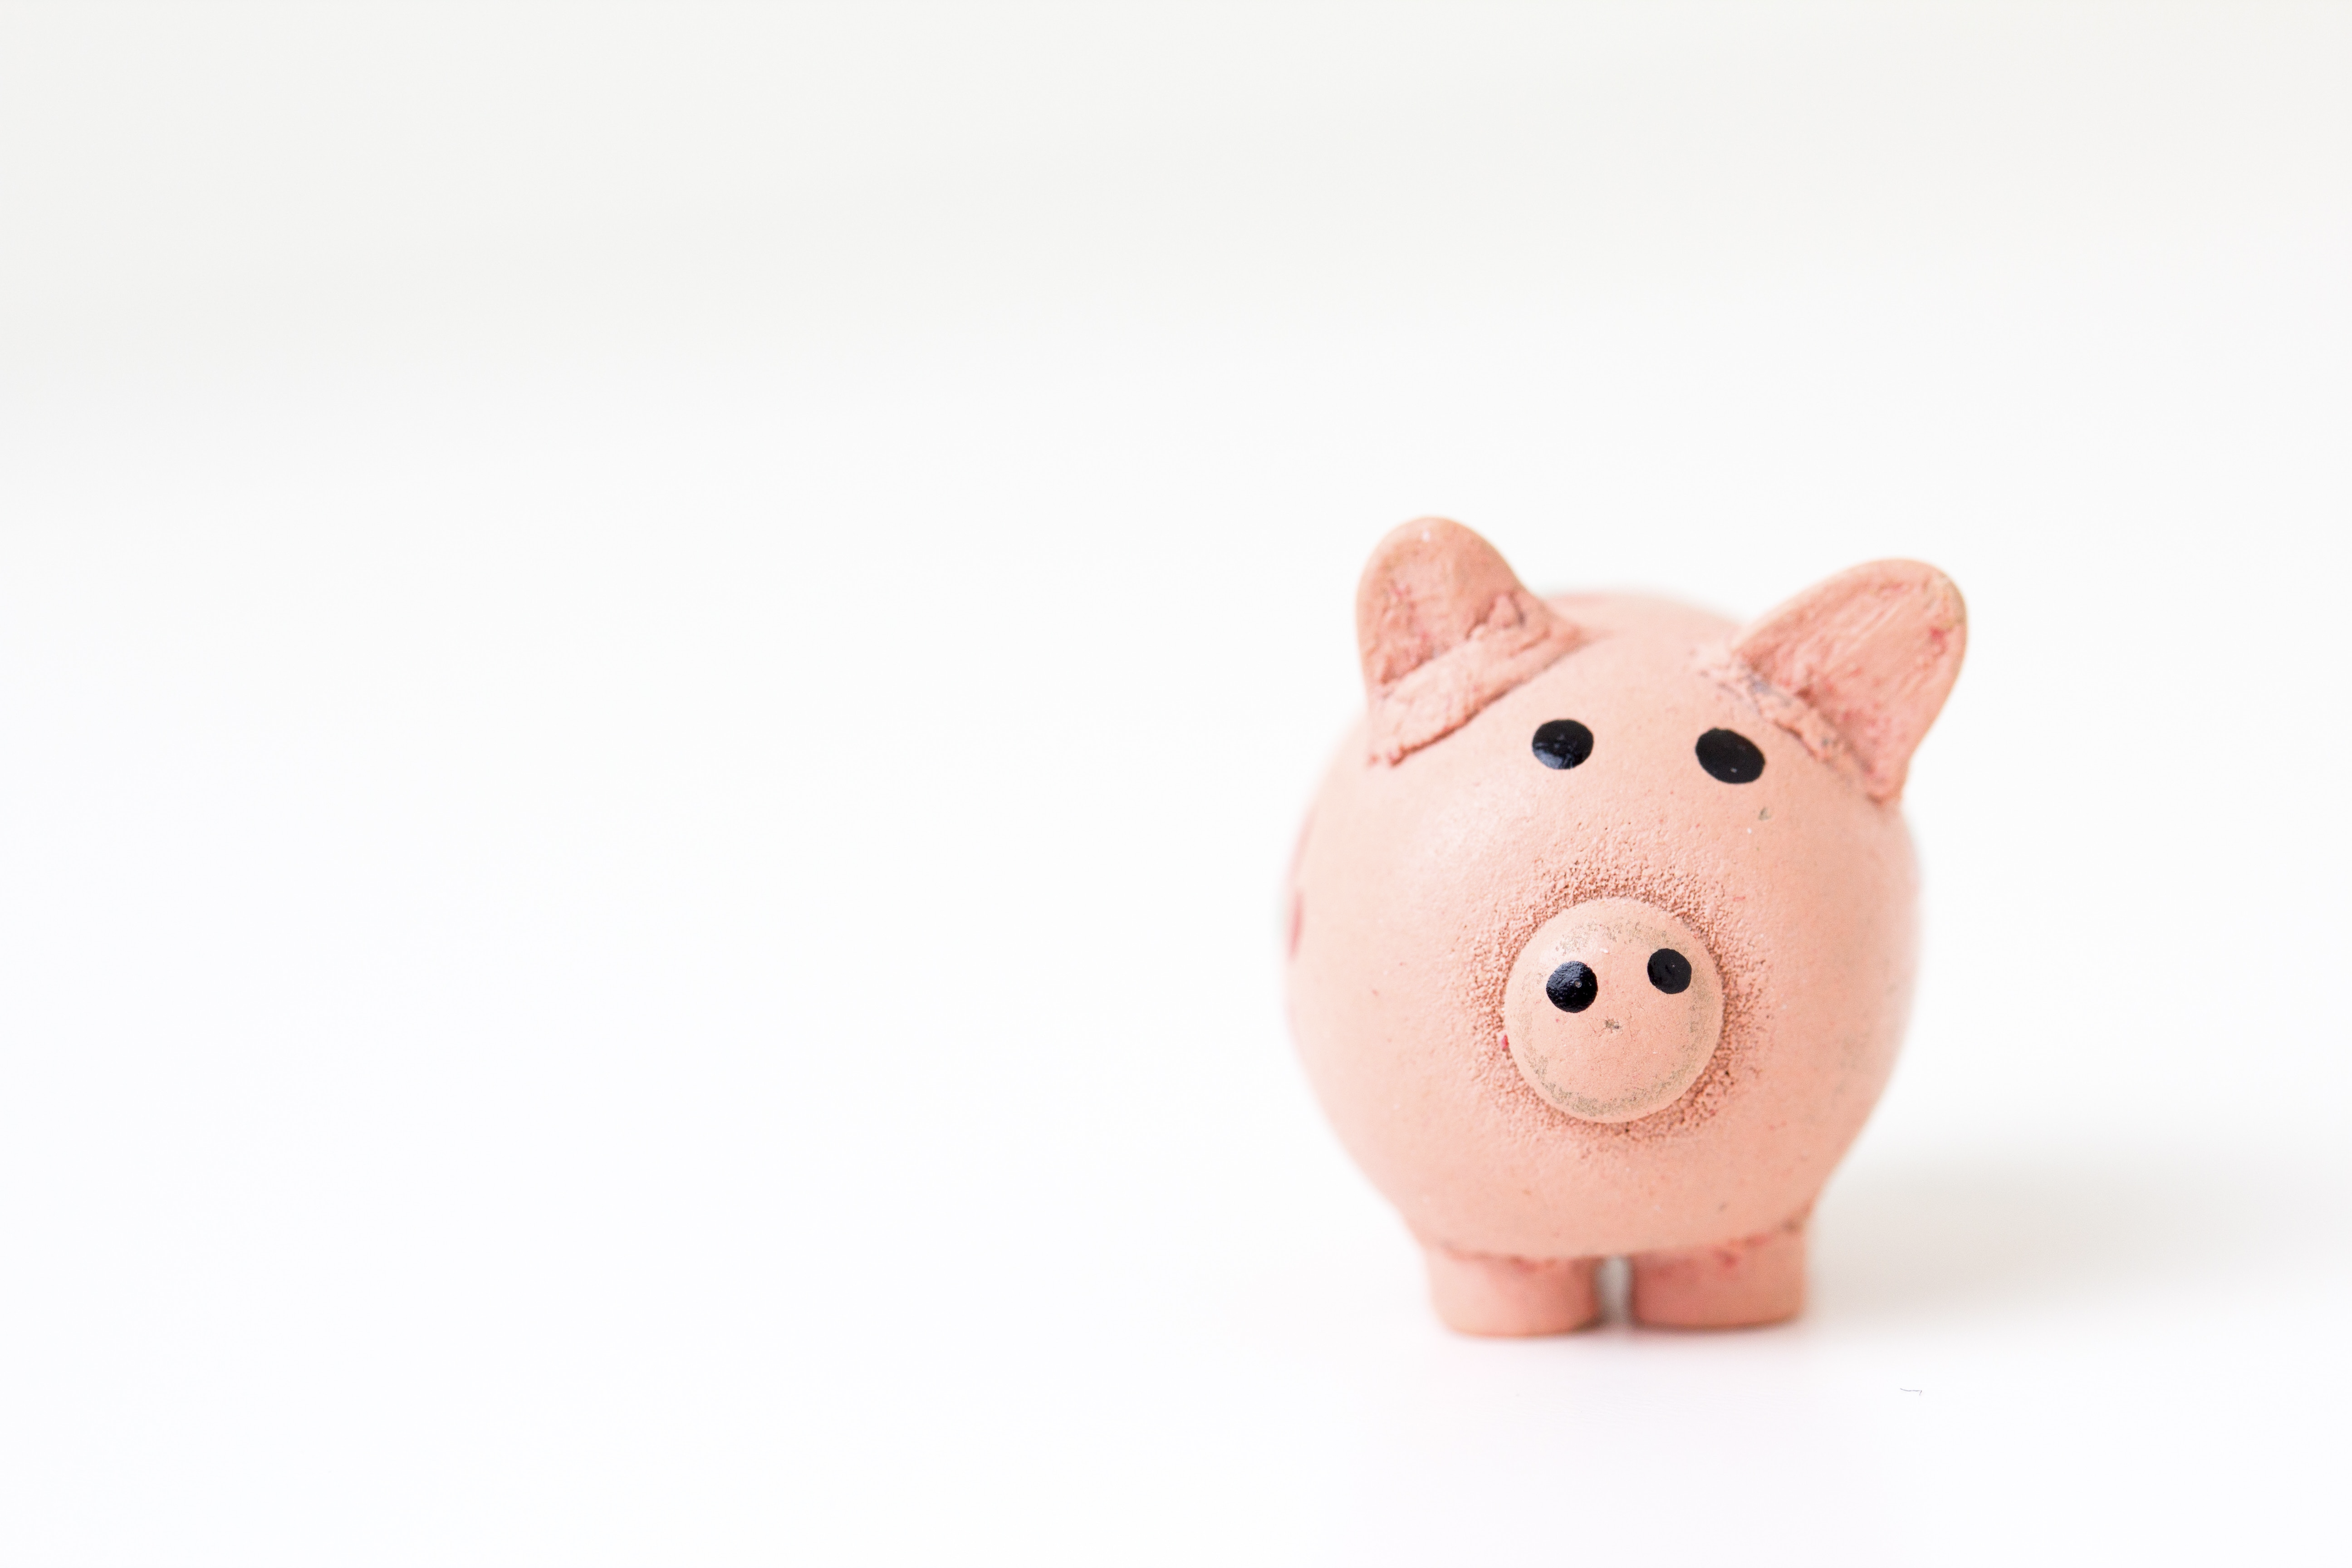 A piggy bank in the shape of a pig on a white background